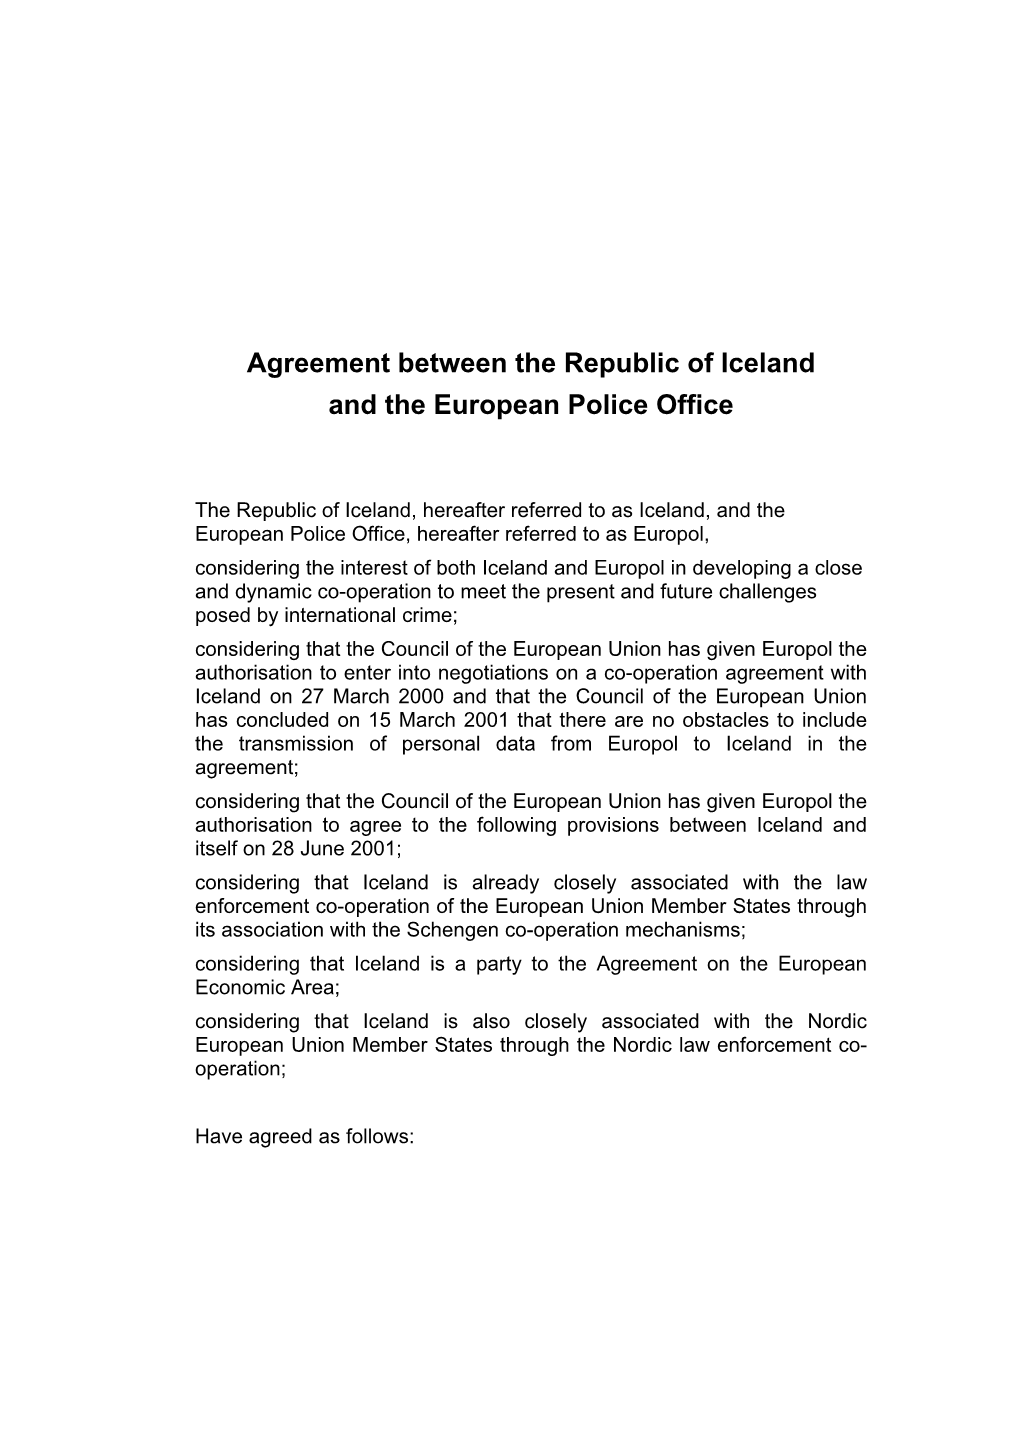 Agreement Between the Republic of Iceland and the European Police Office